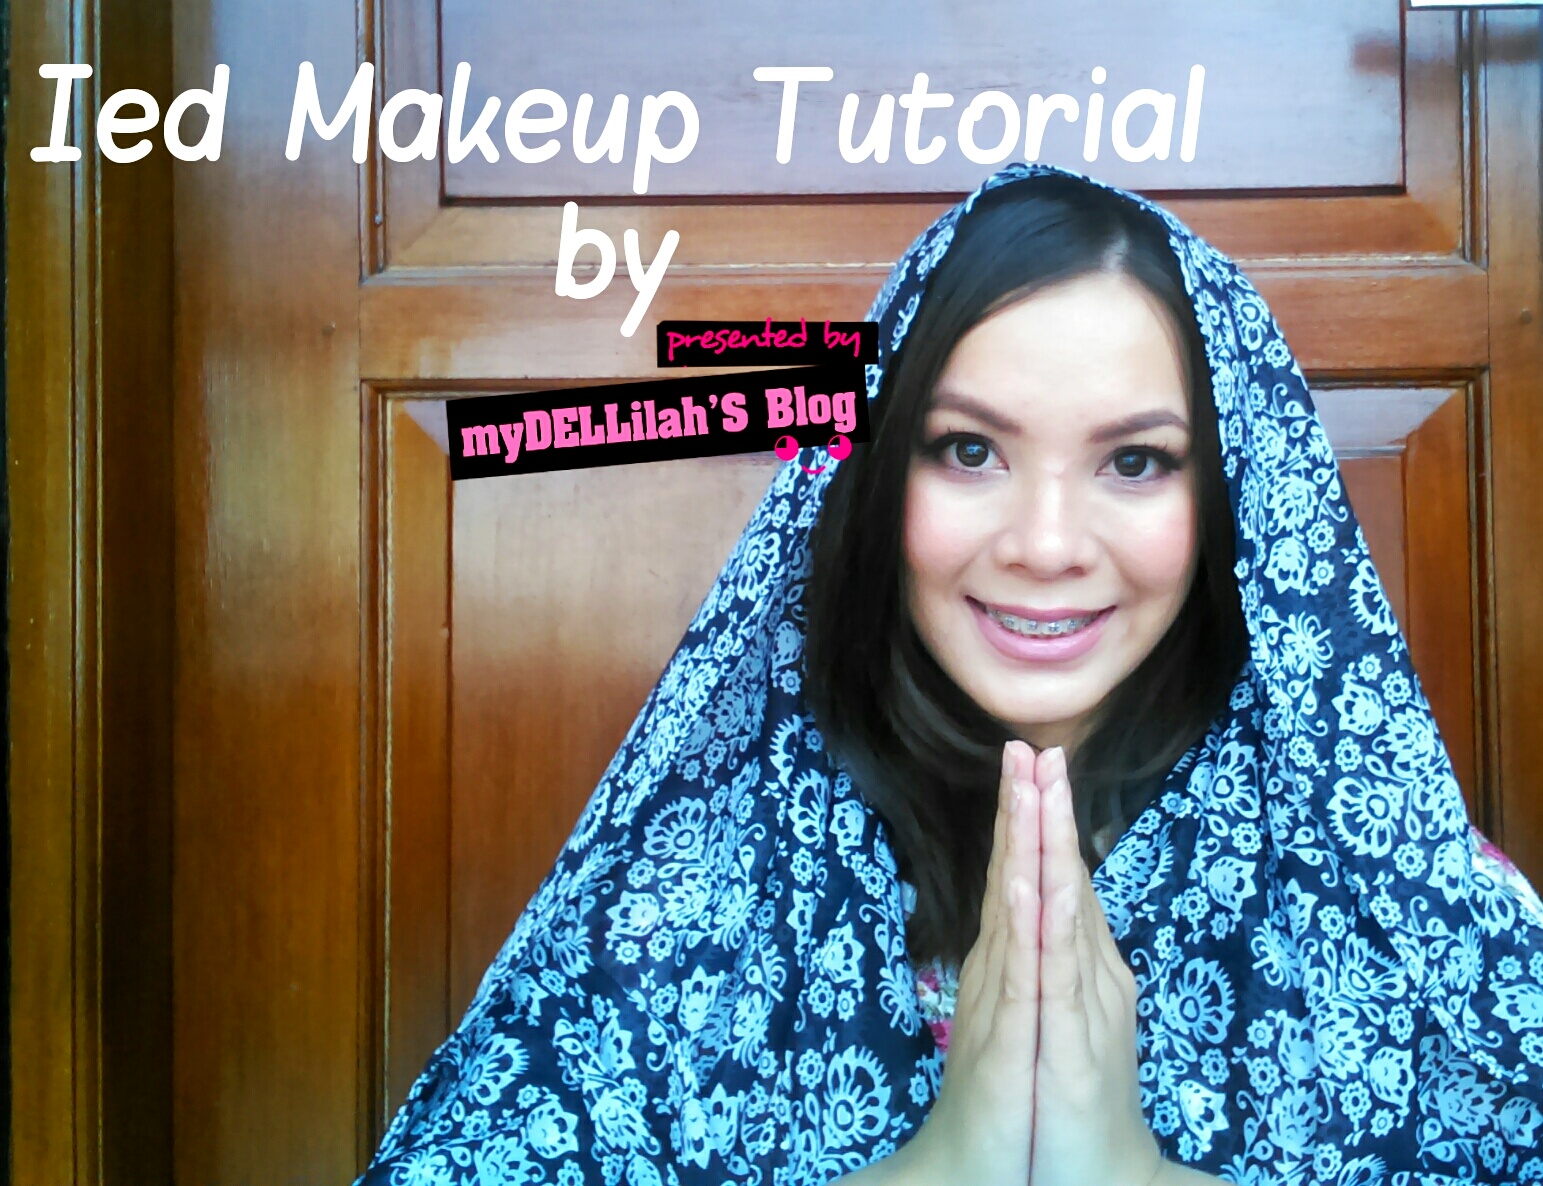 MOTD Soft Feminime IED Makeup Tutorial With 1 Day Acuvue Define